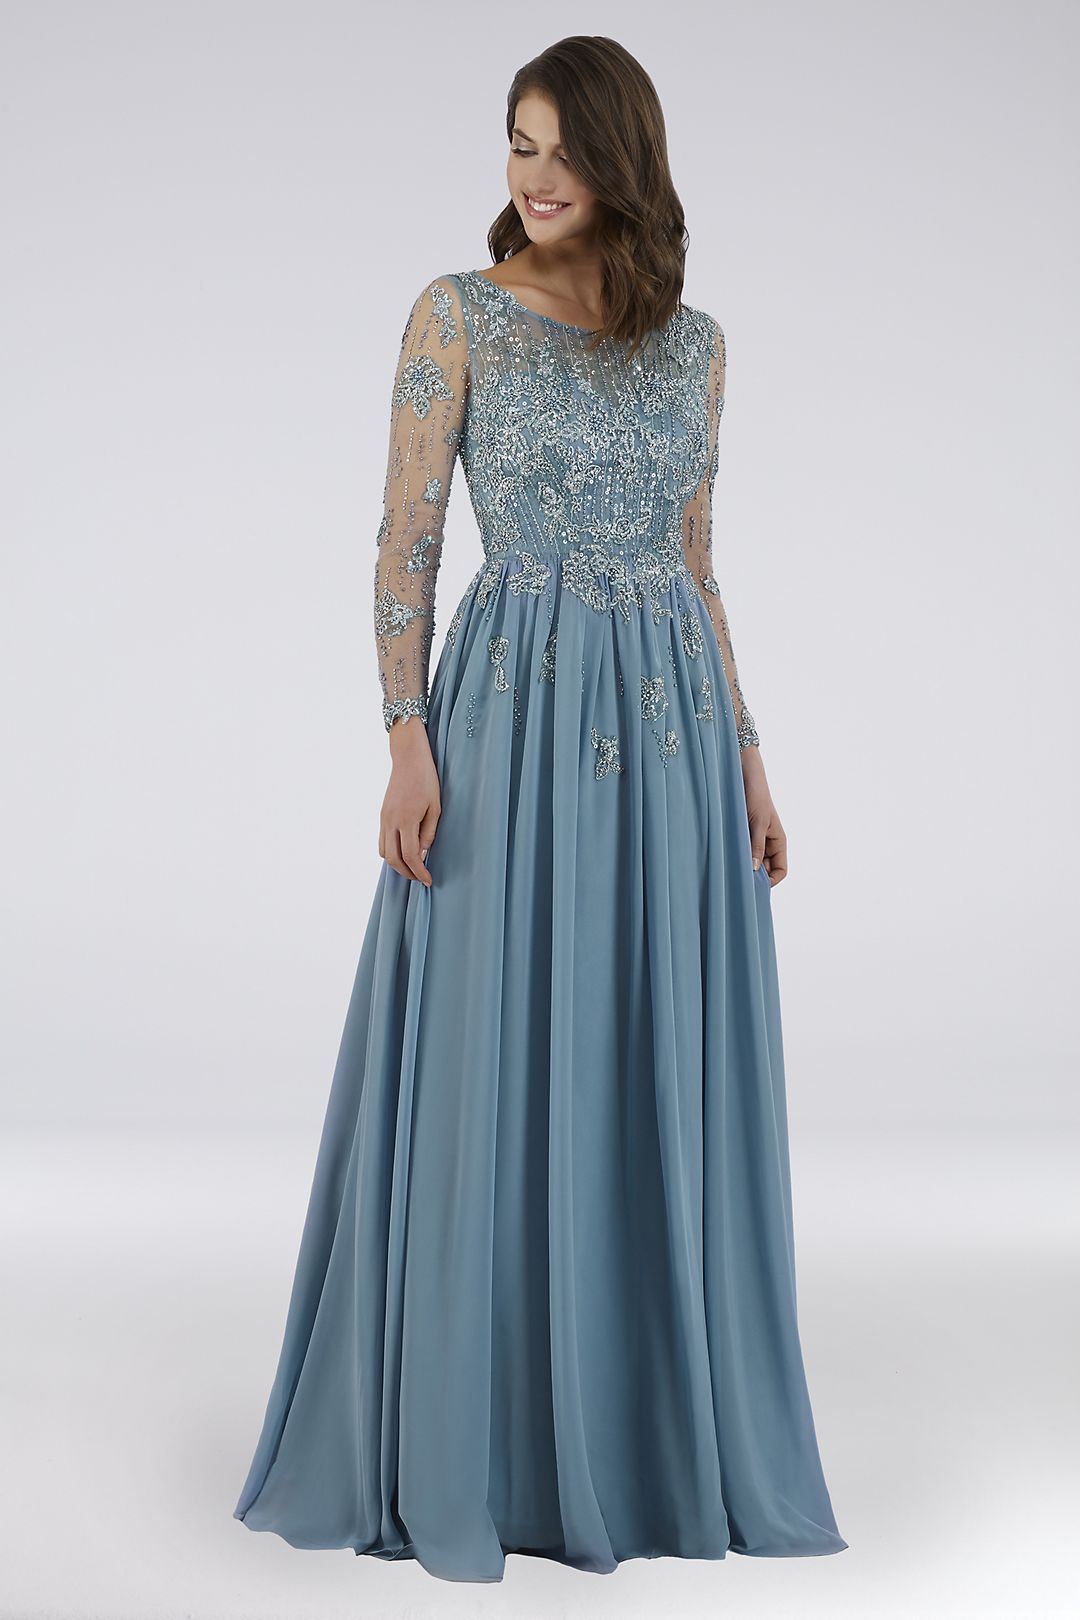 Lara Floral Applique Long Sleeve Chiffon Ball Gown Image 1